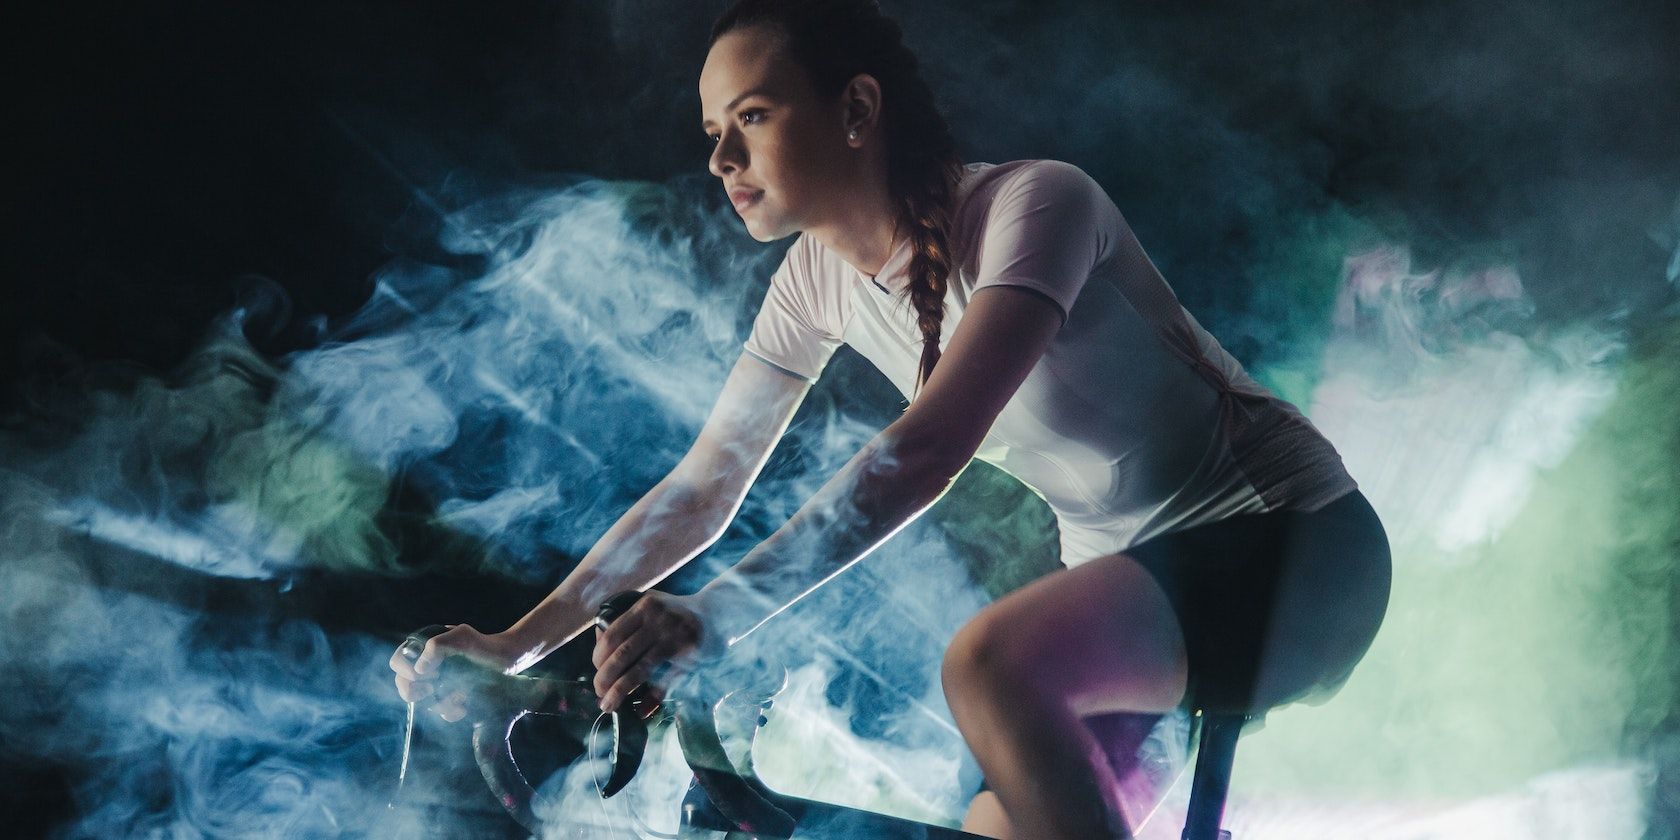 woman riding indoor bicycle